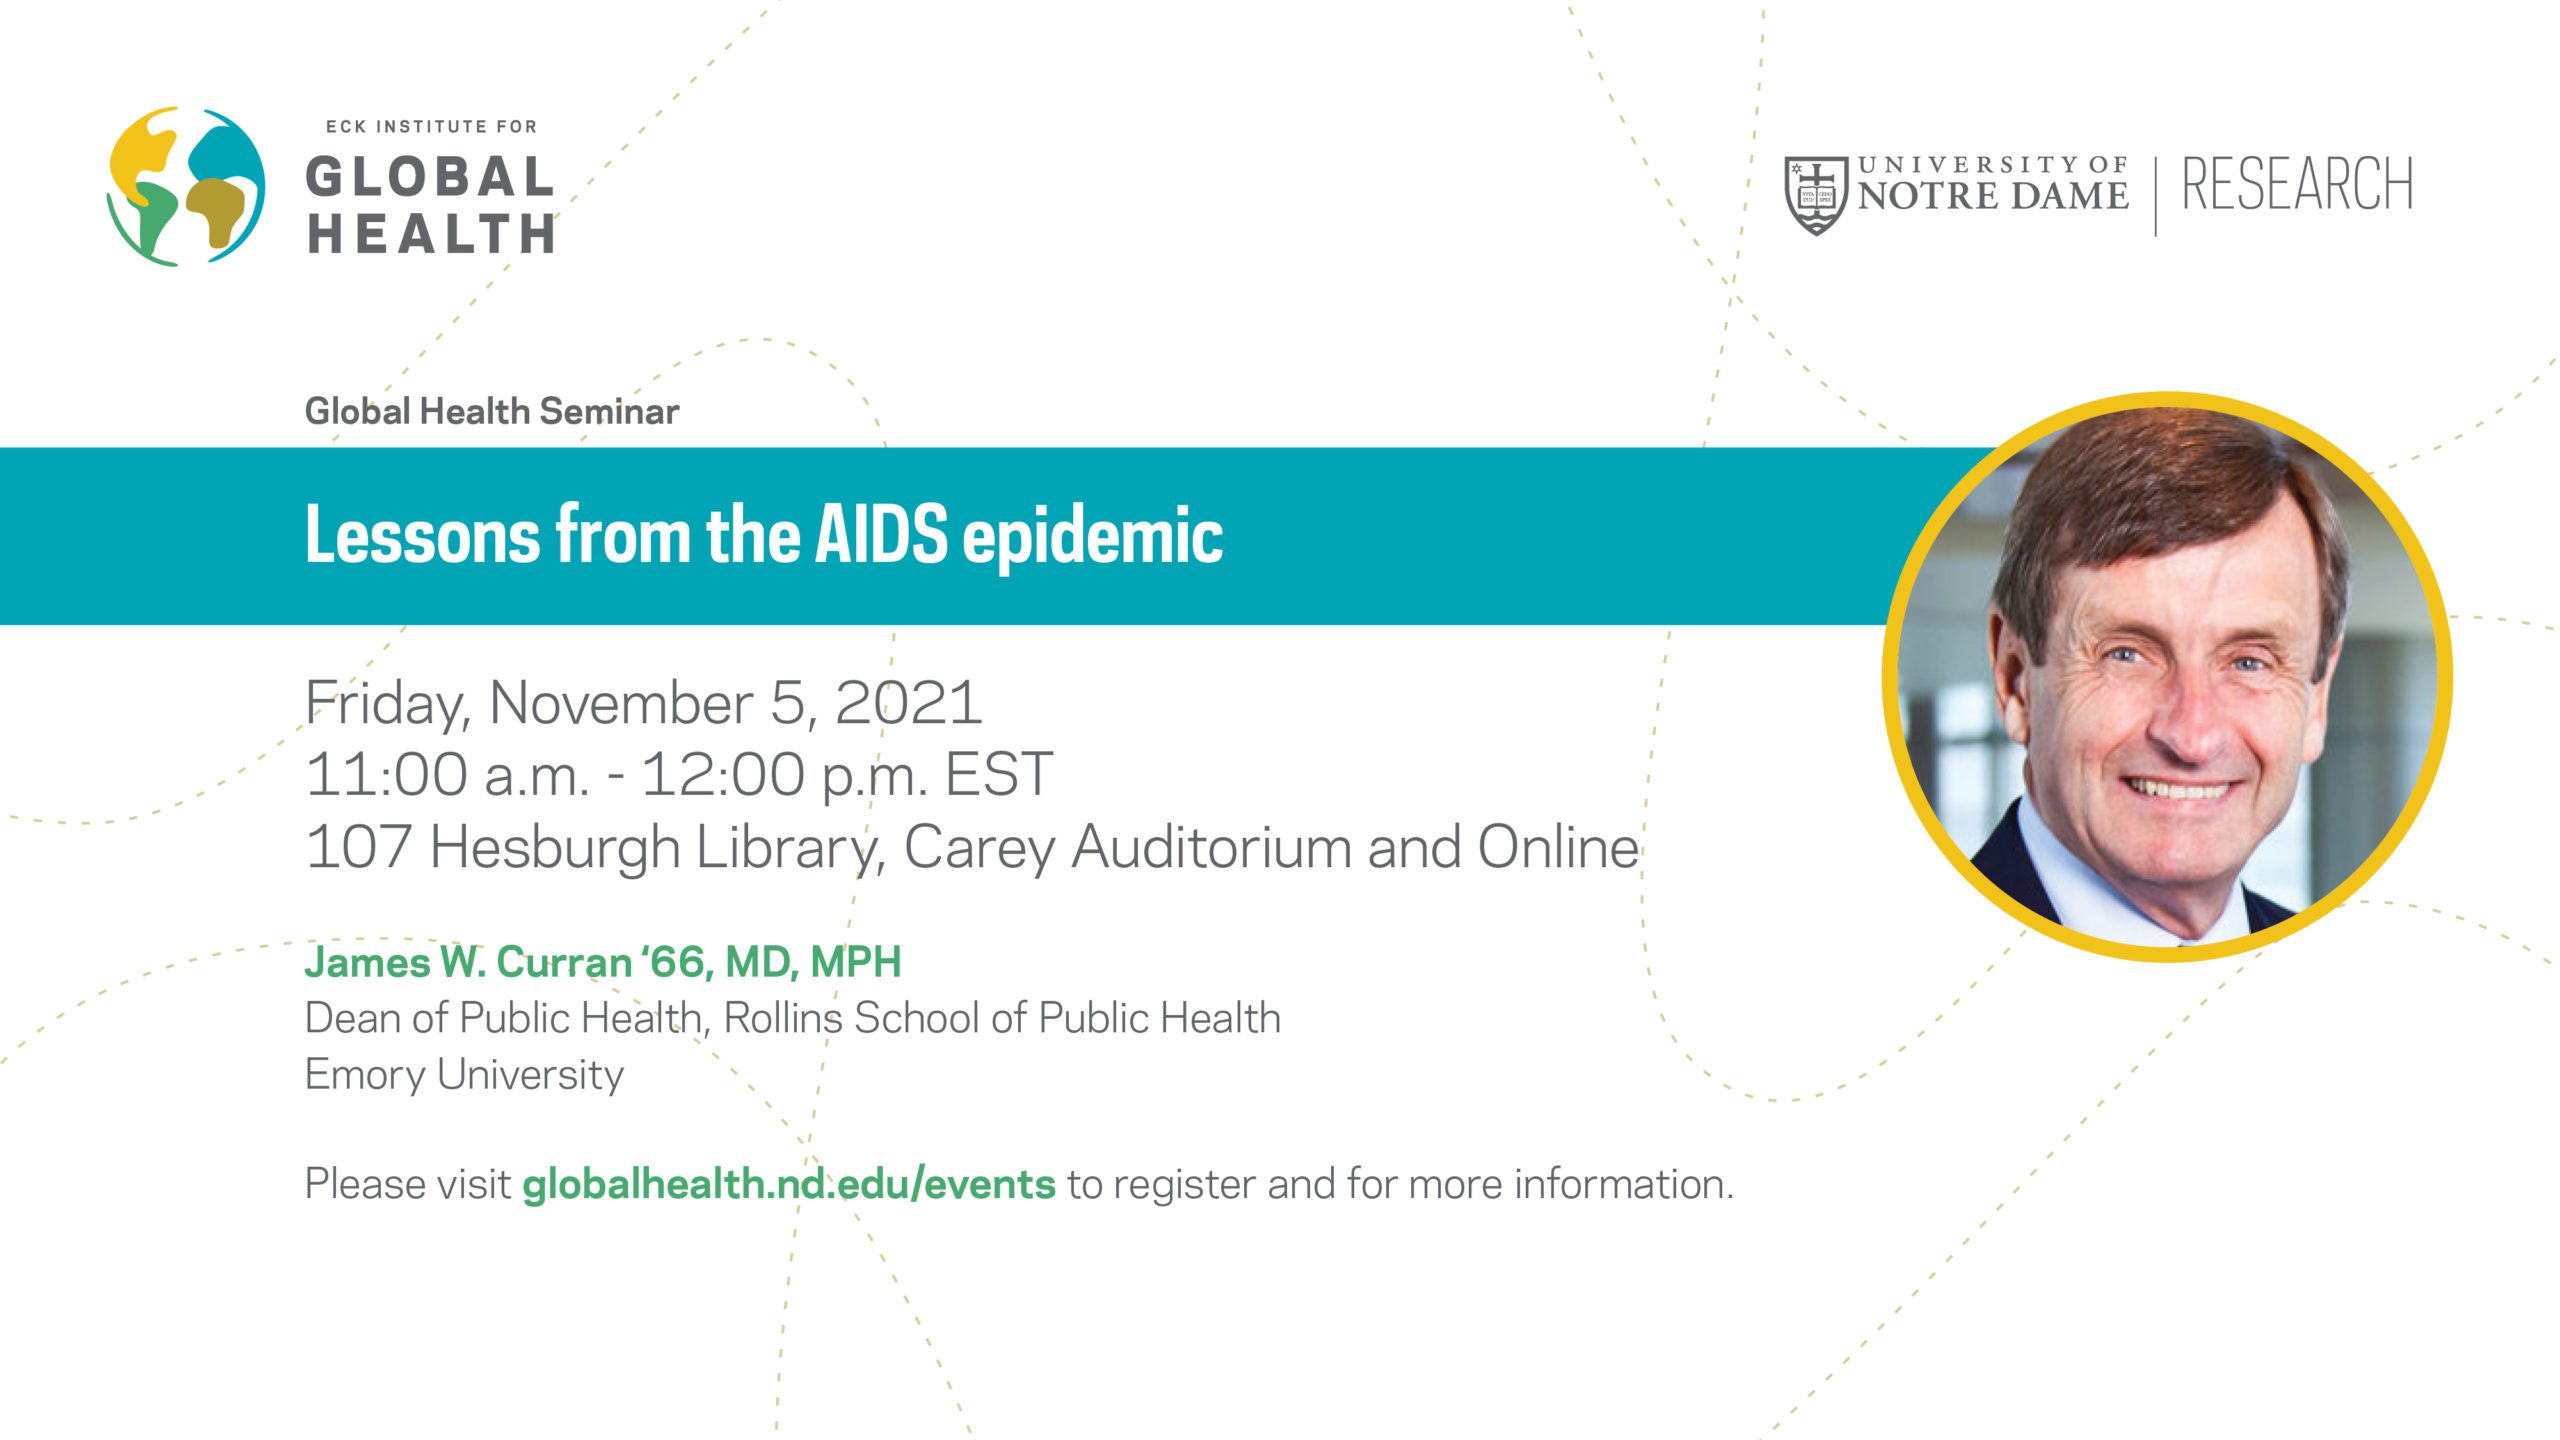 Global Health Seminar: “Lessons from the AIDS epidemic”